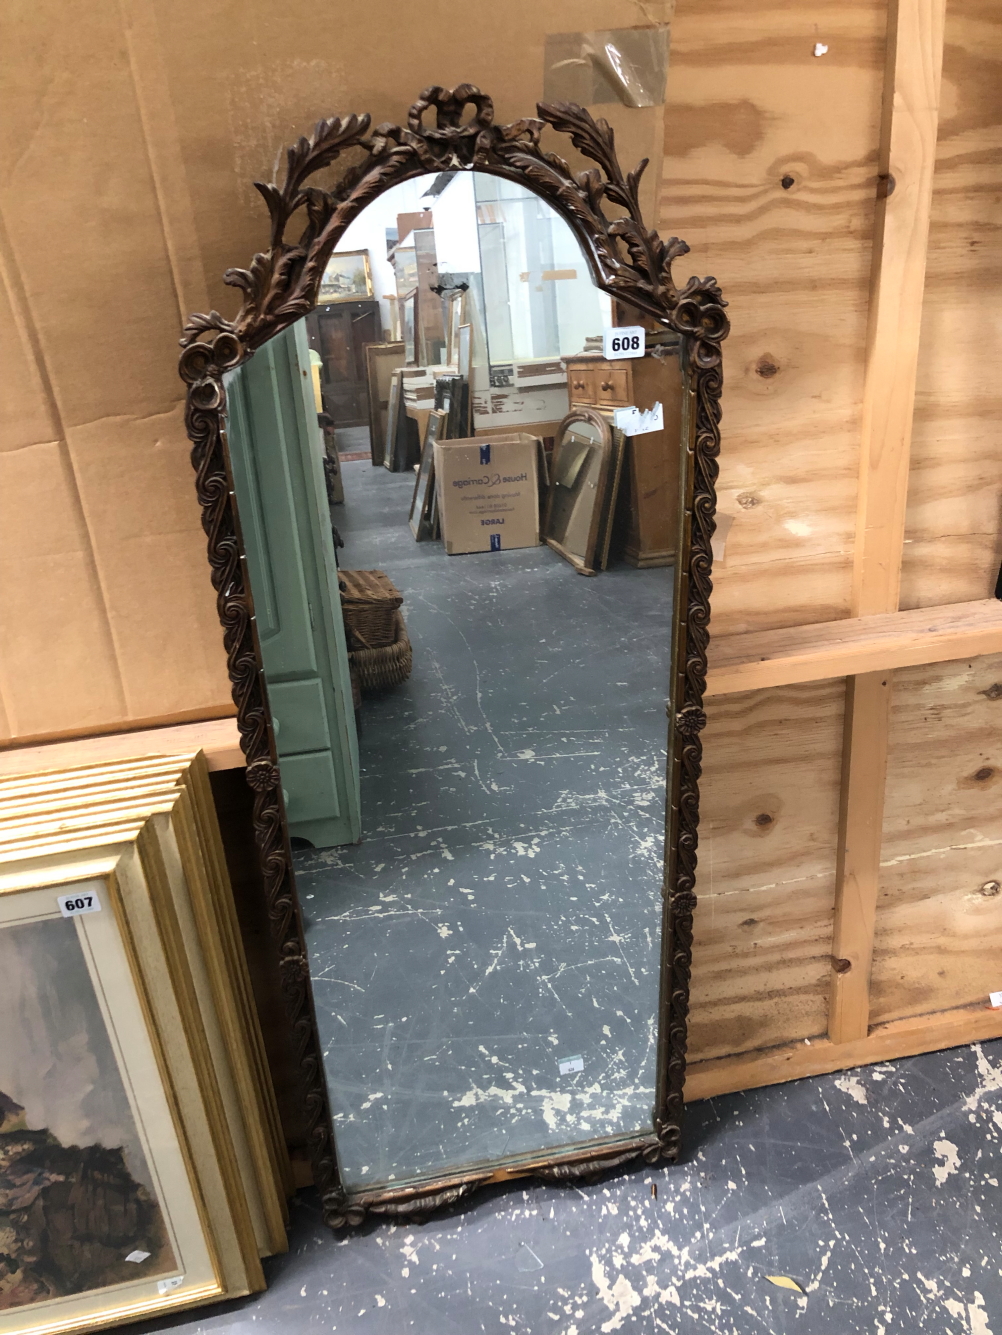 A VINTAGE DRESSING MIRROR IN AN ORNATE FRAME